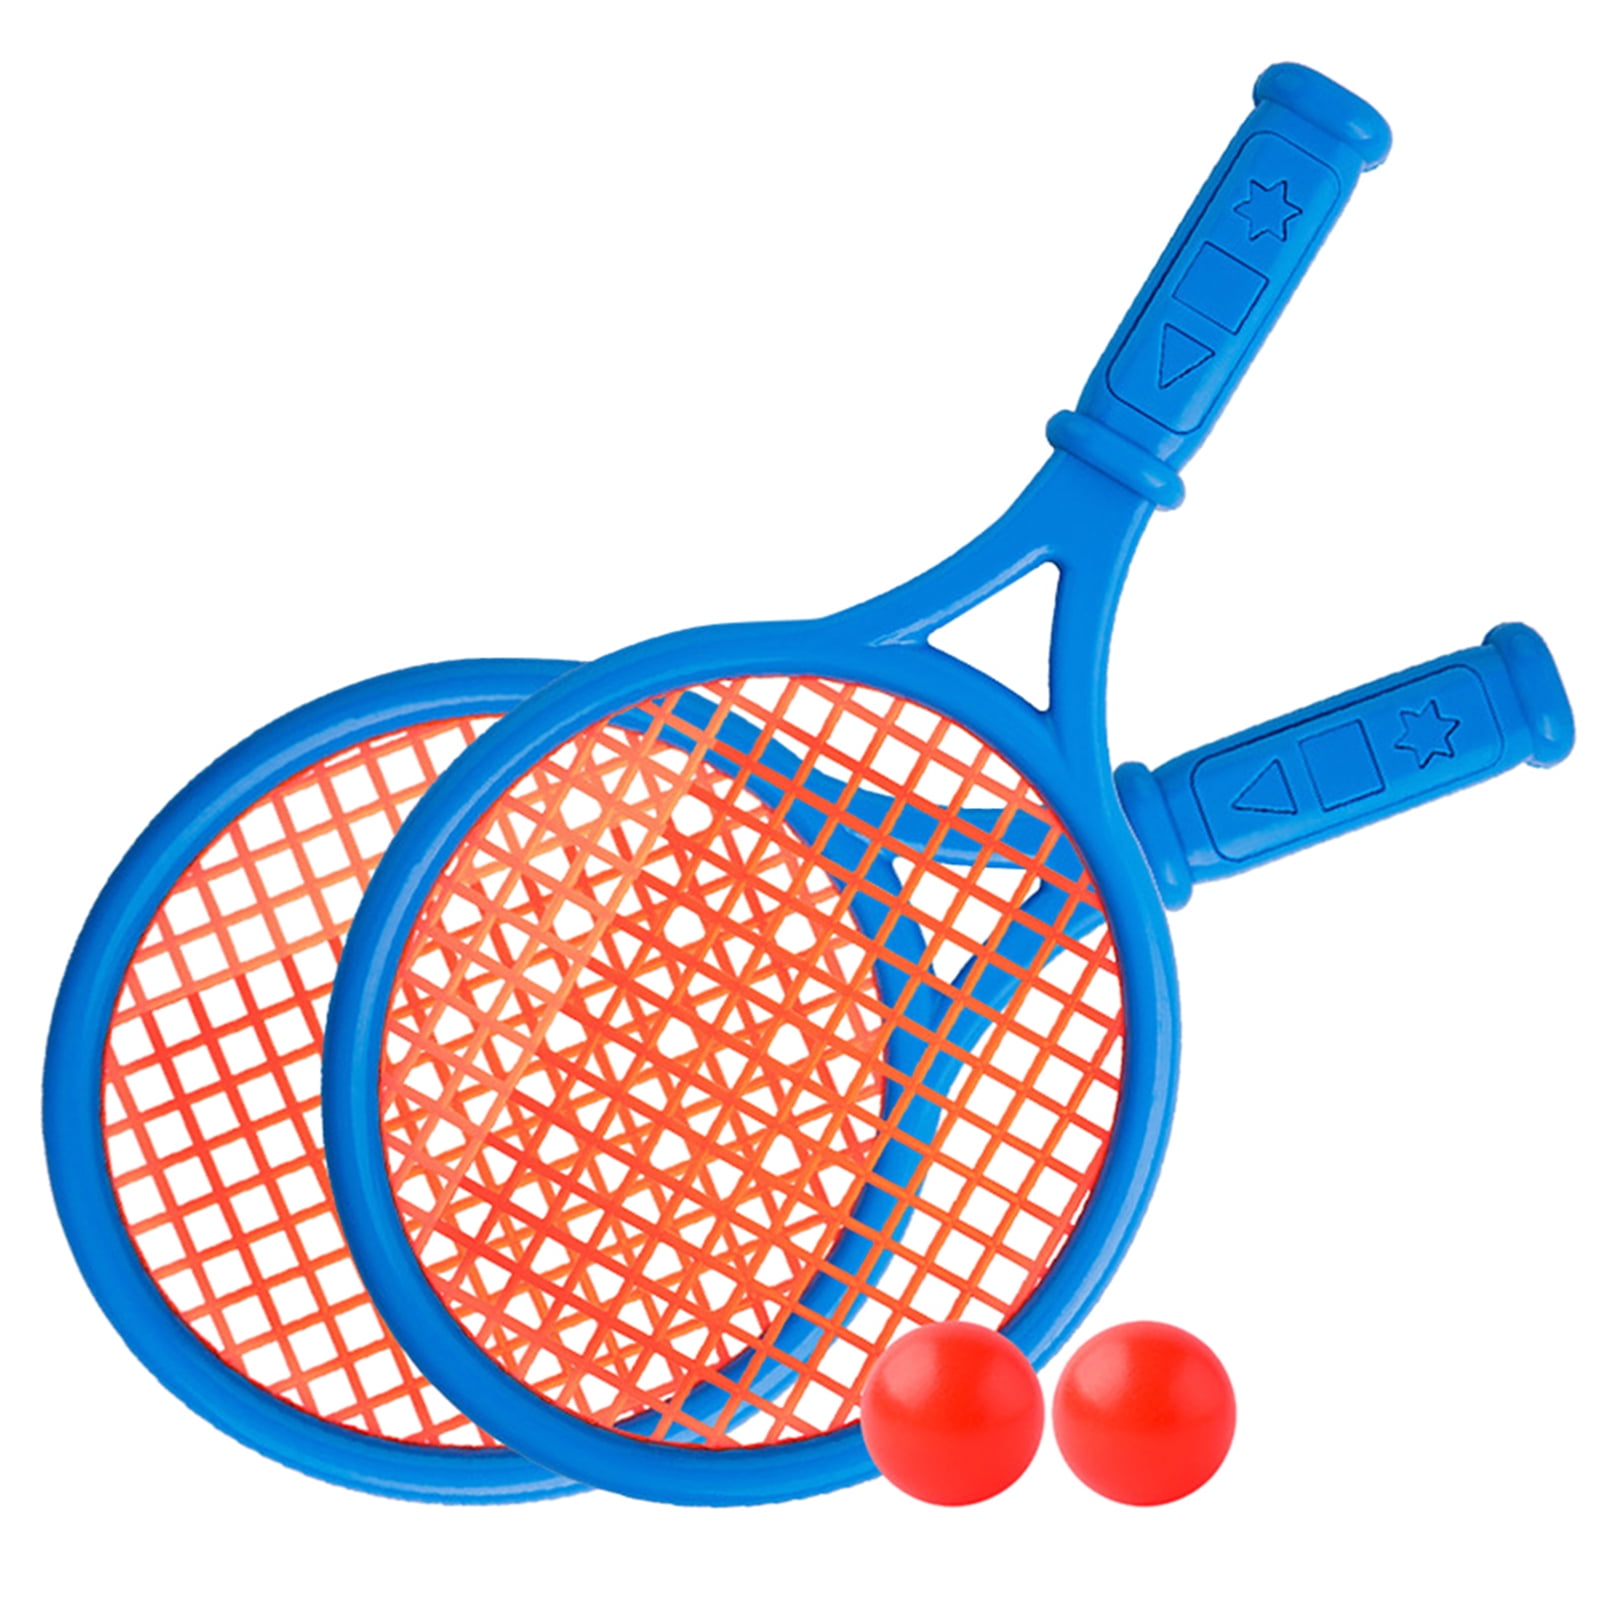 2pcs /Set Tennis Racket Set Children Adult Practice Racquet with Training Ball and Carry Bag for Home Outdoor Games Sports Green 